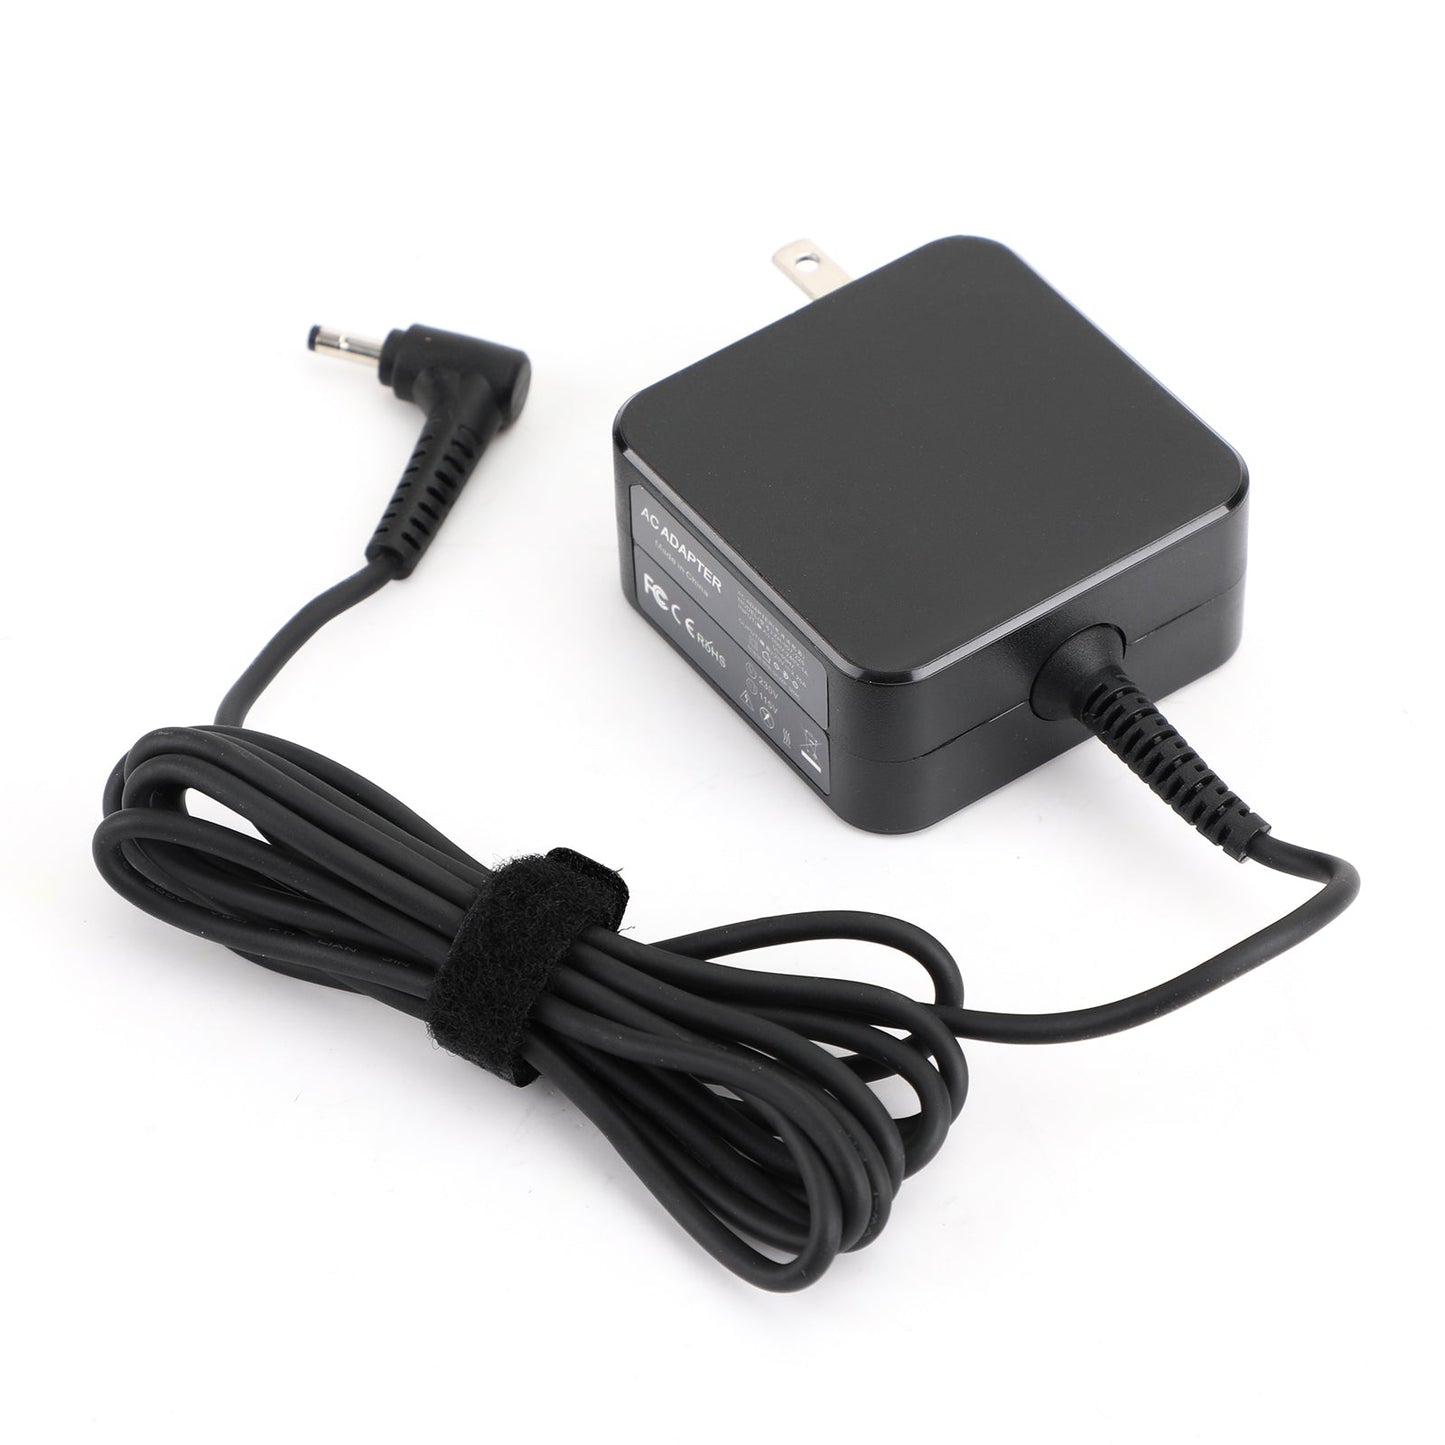 OEM Power Adapter Charger for Lenovo ideapad 100s 110s 110 310 510 510S 710 710s